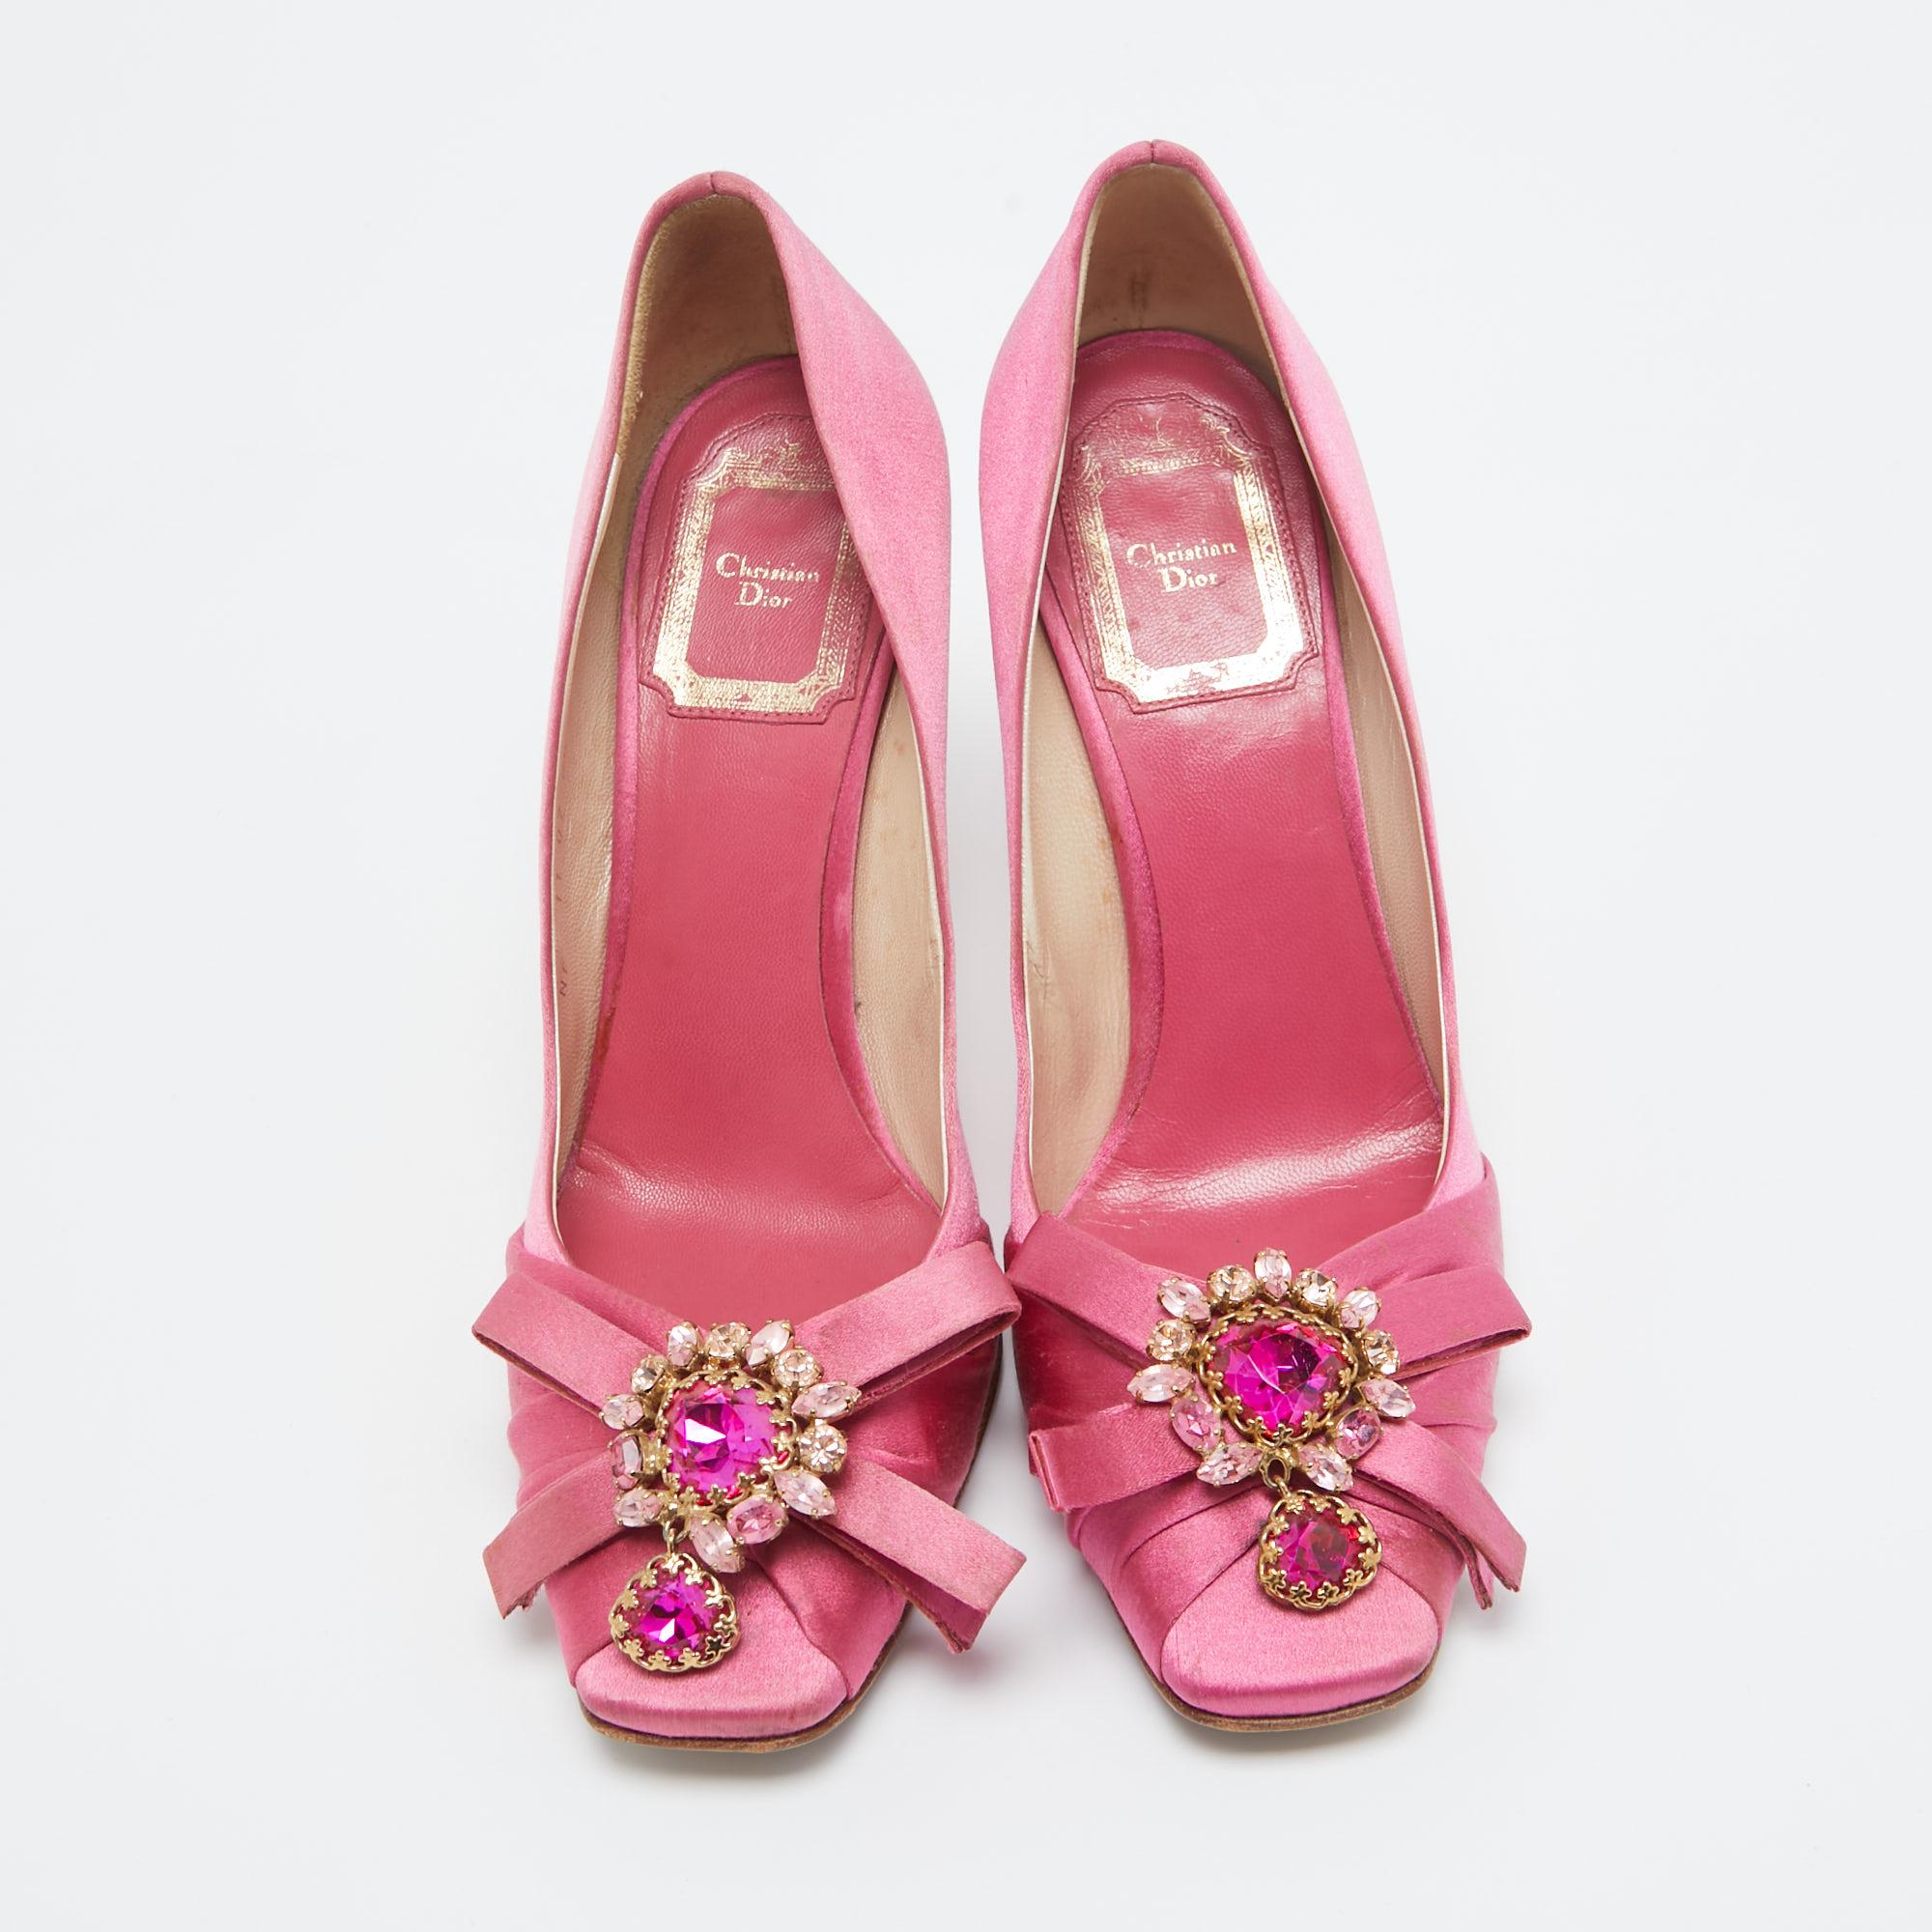 The elegant pumps are covered in pink satin and lined with leather. Embellished uppers, low platforms, and high heels complete the stunning design.

Includes
Original Box